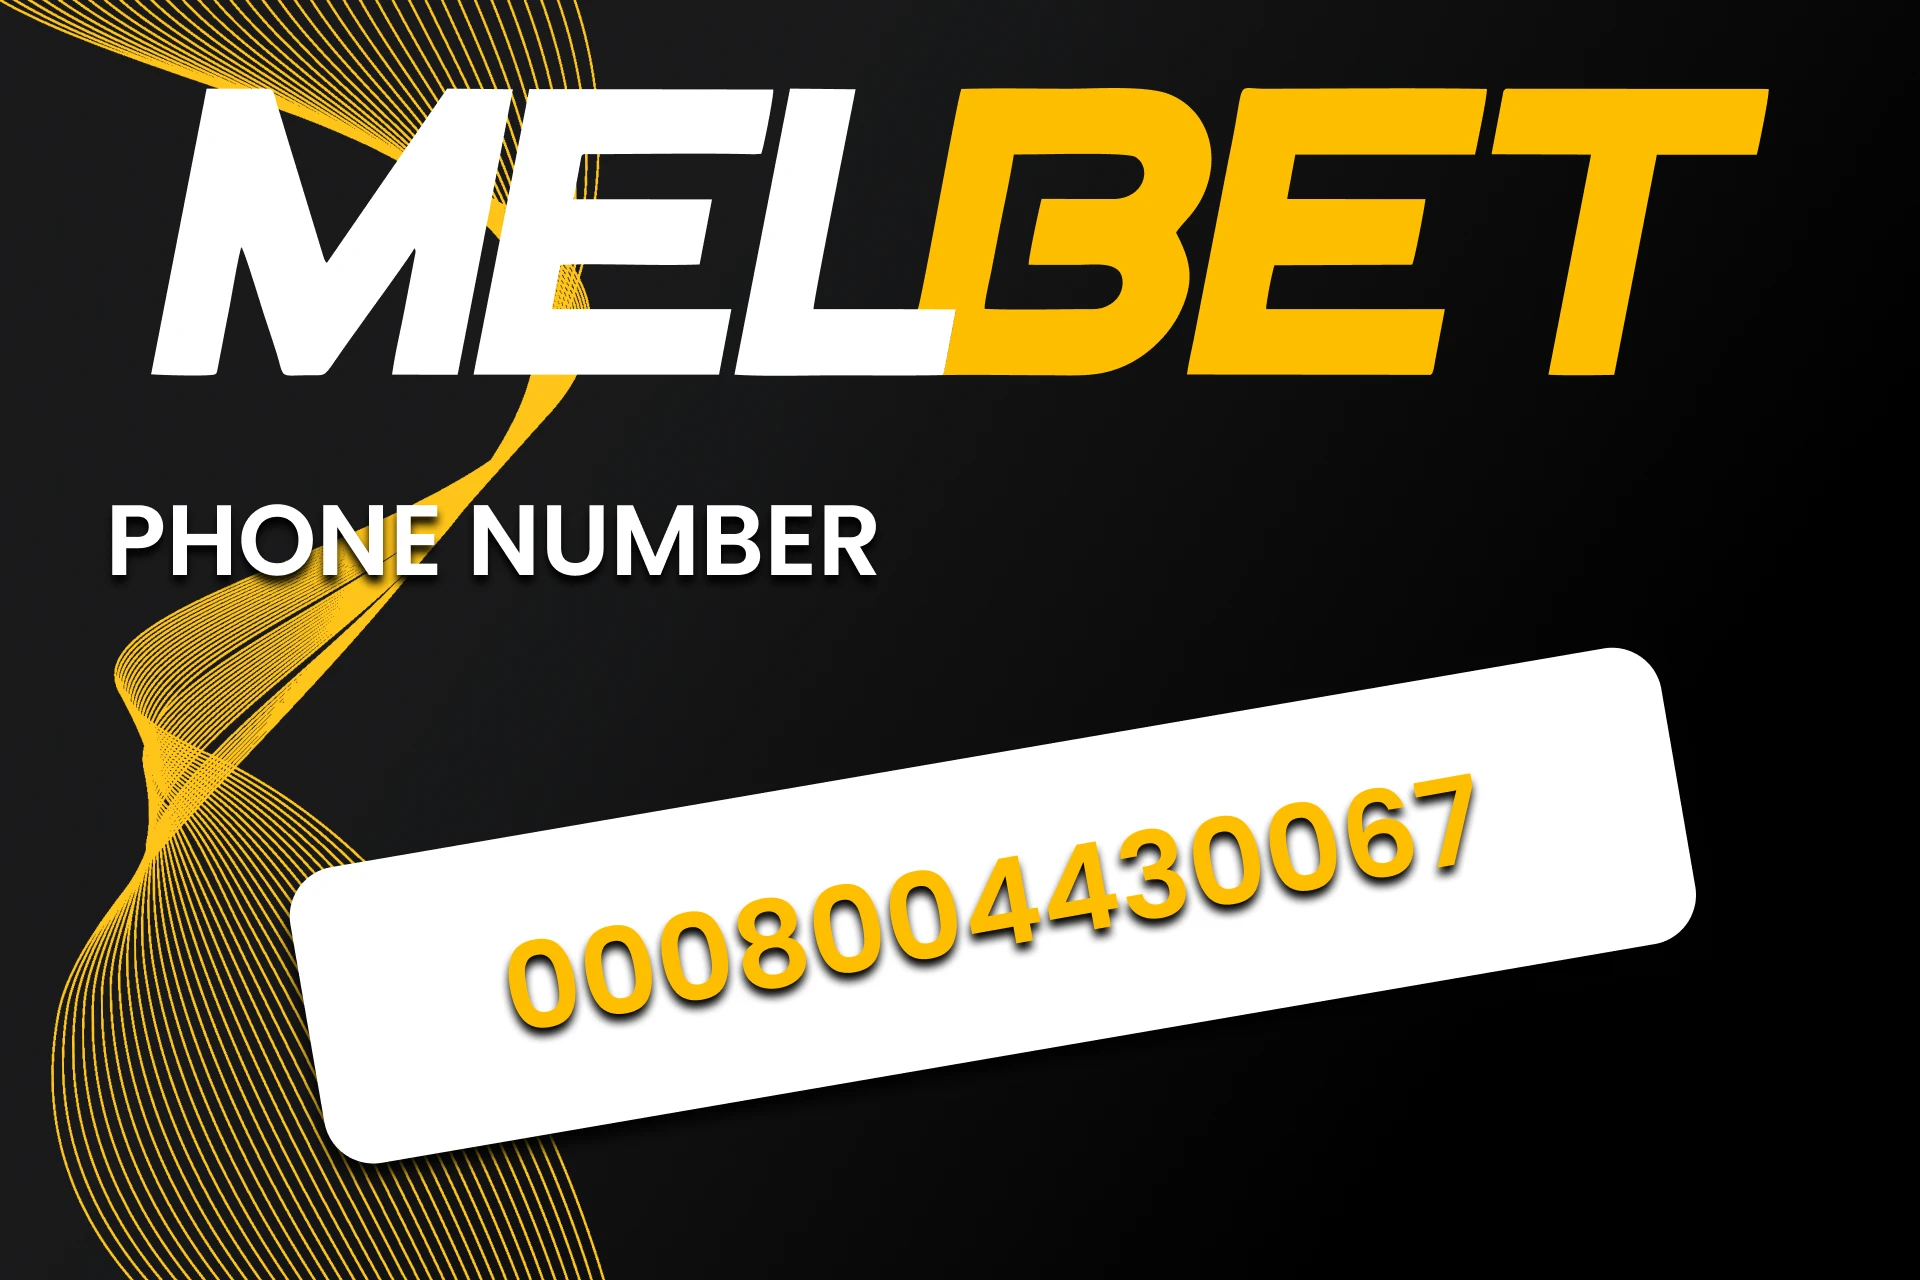 If you have any questions, you can contact the Melbet team via phone number.